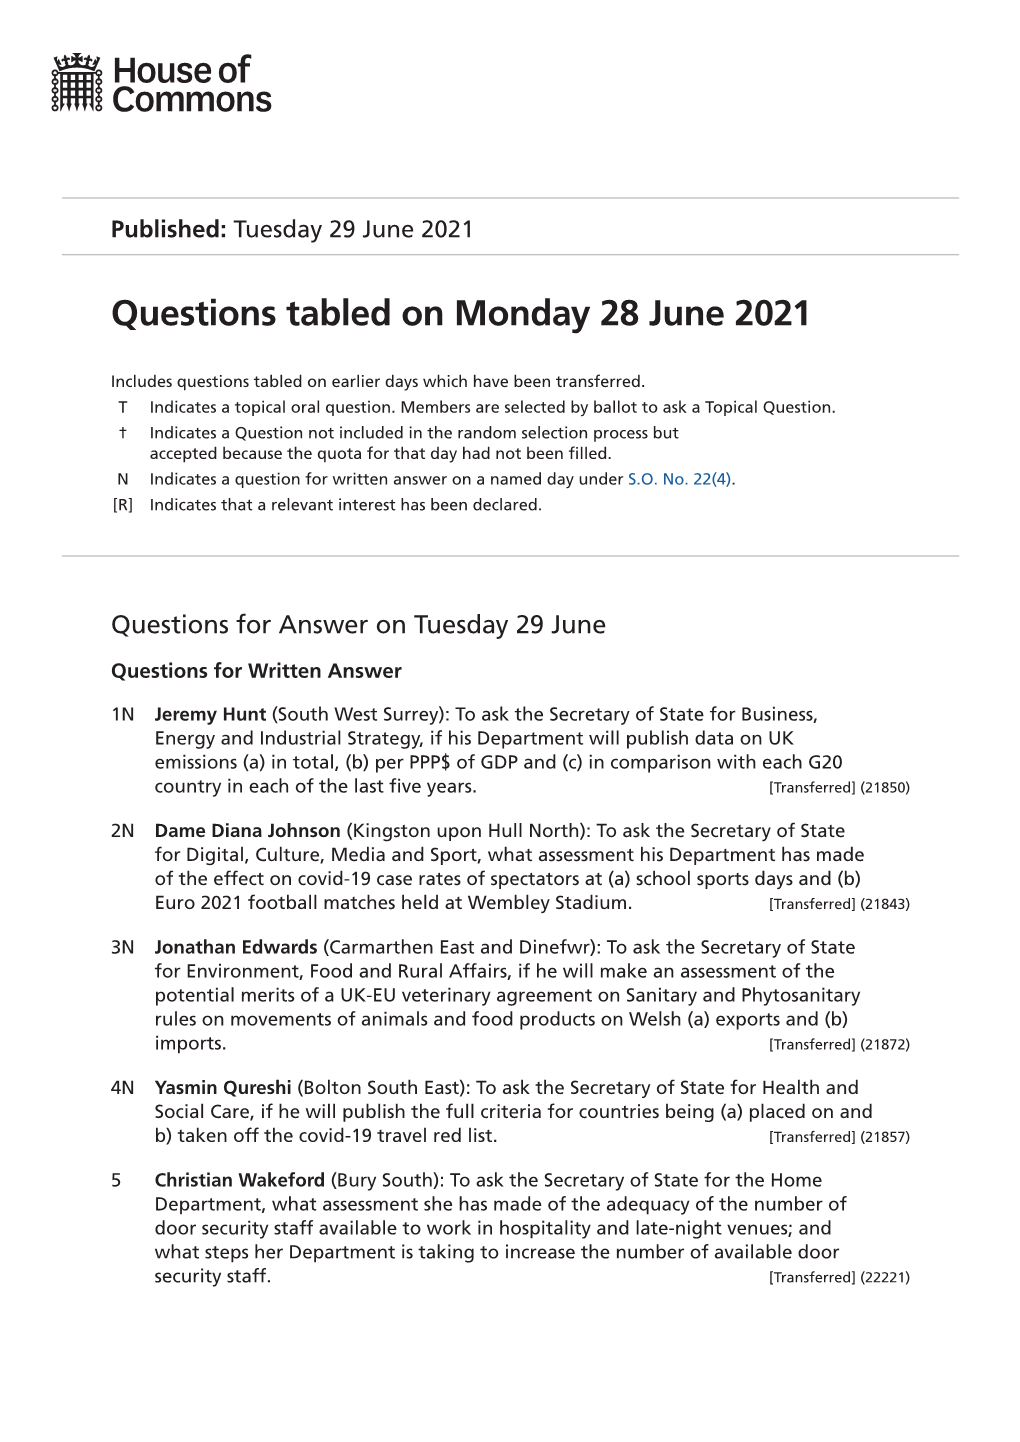 Questions Tabled on Monday 28 June 2021